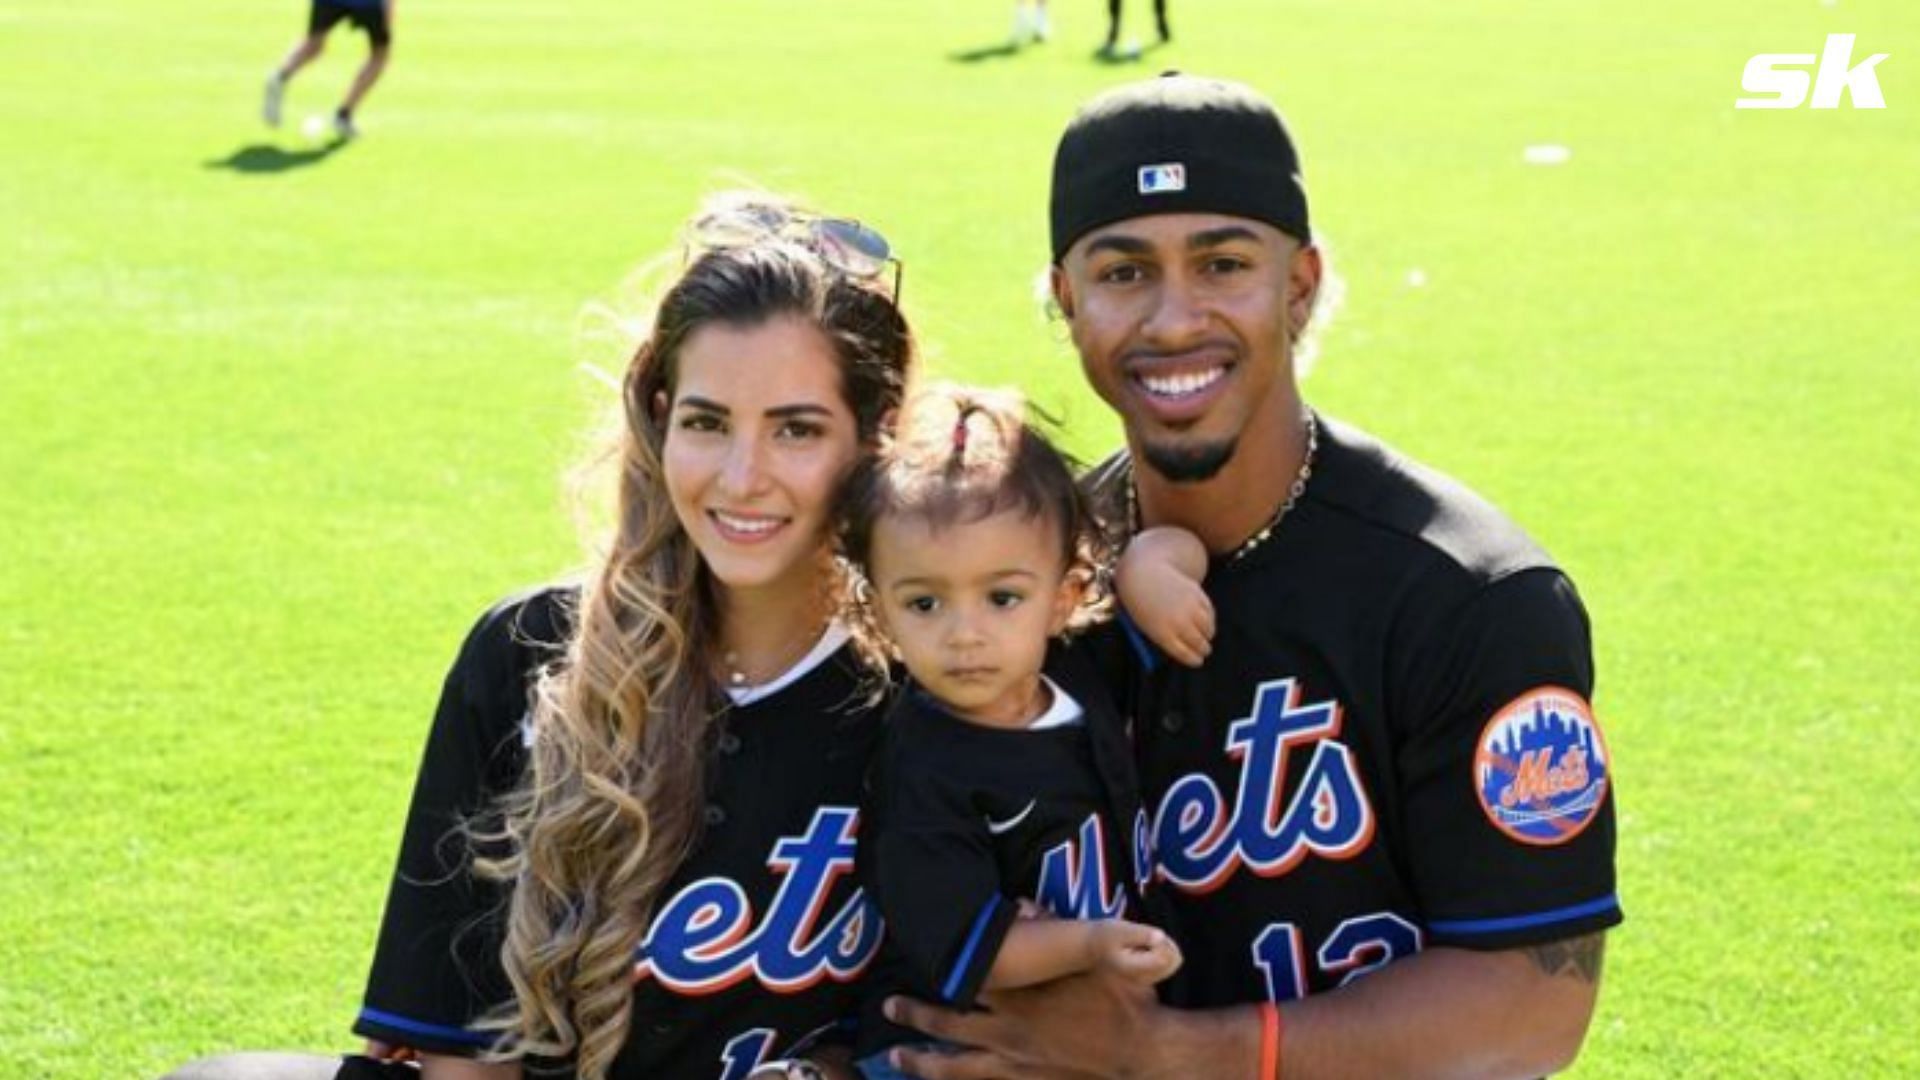 WATCH: Francisco Lindor's daughter Kalina danced in joy after Mets manager  Buck Showalter was named the NL manager of the year